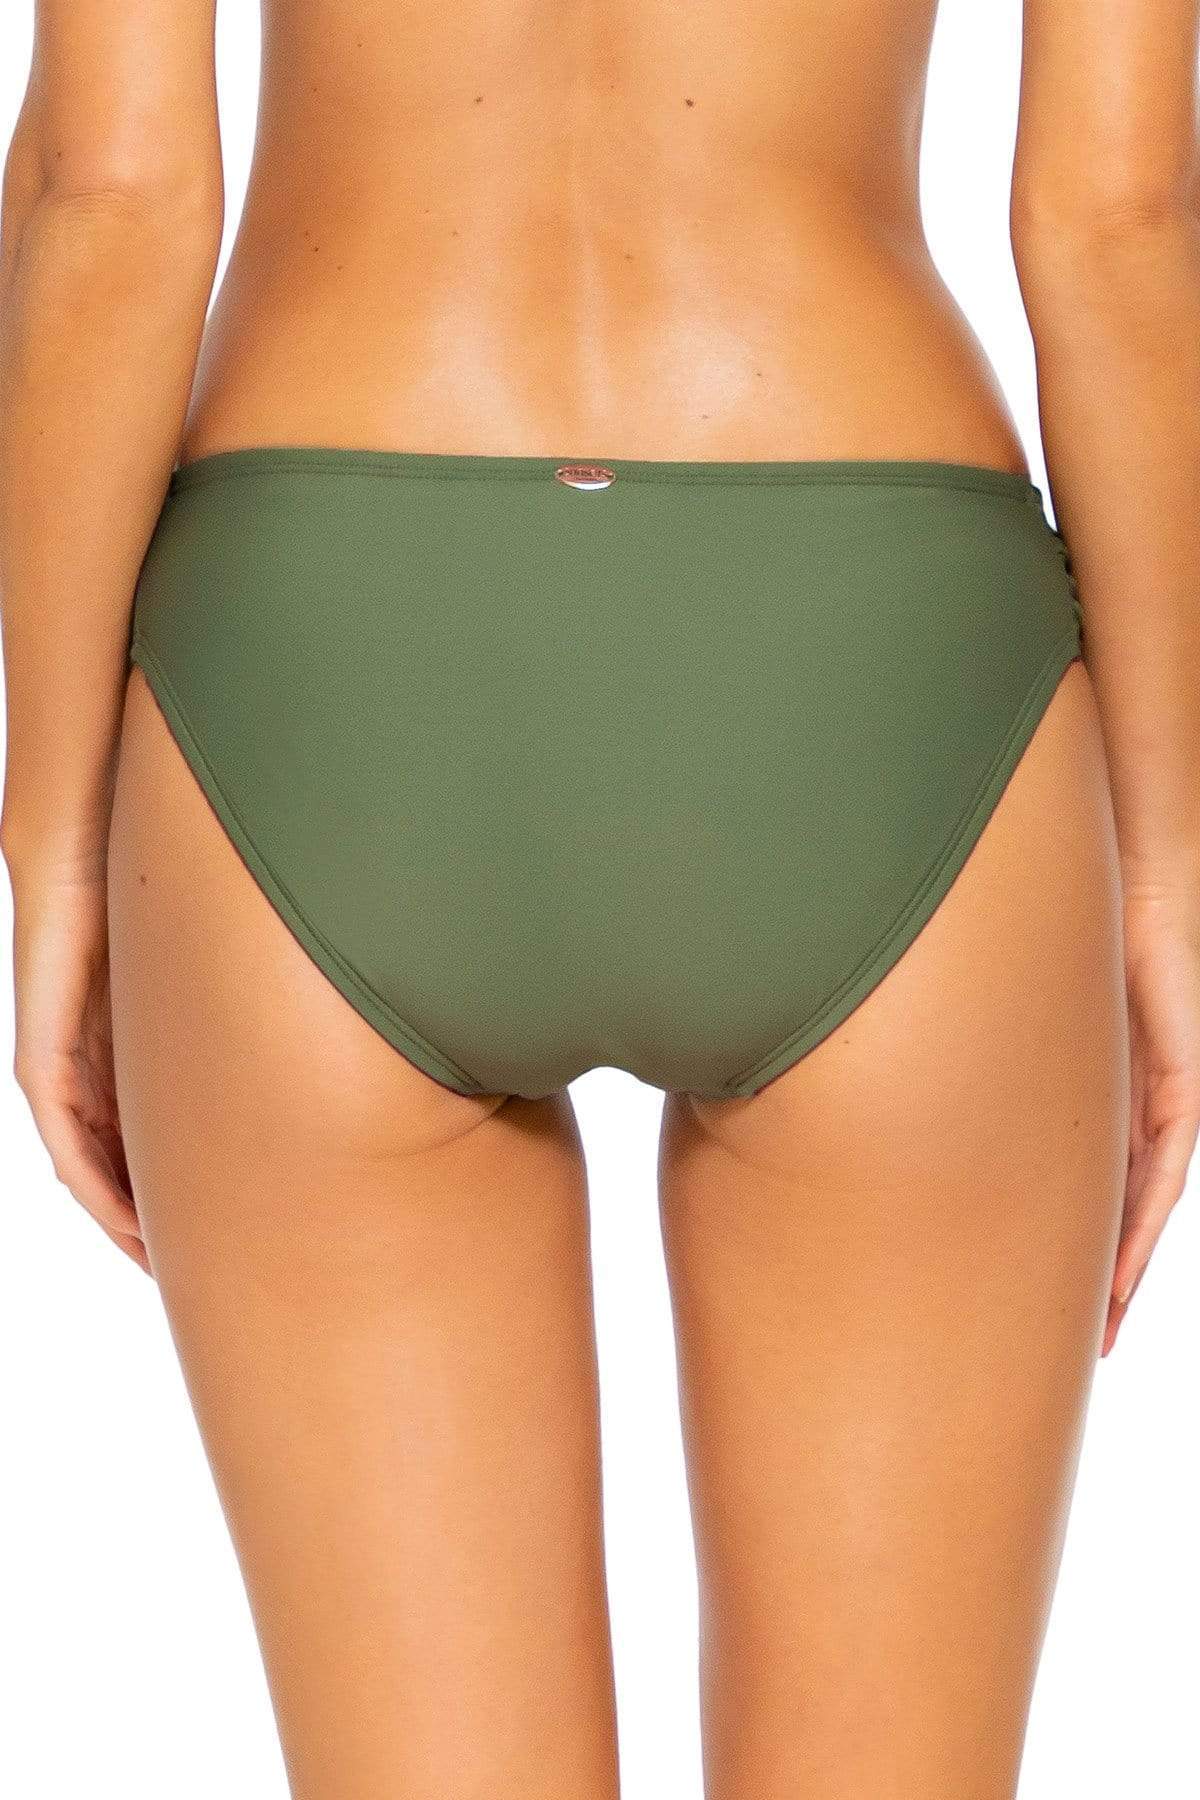 Bestswimwear -  Sunsets Olive Femme Fatale Hipster